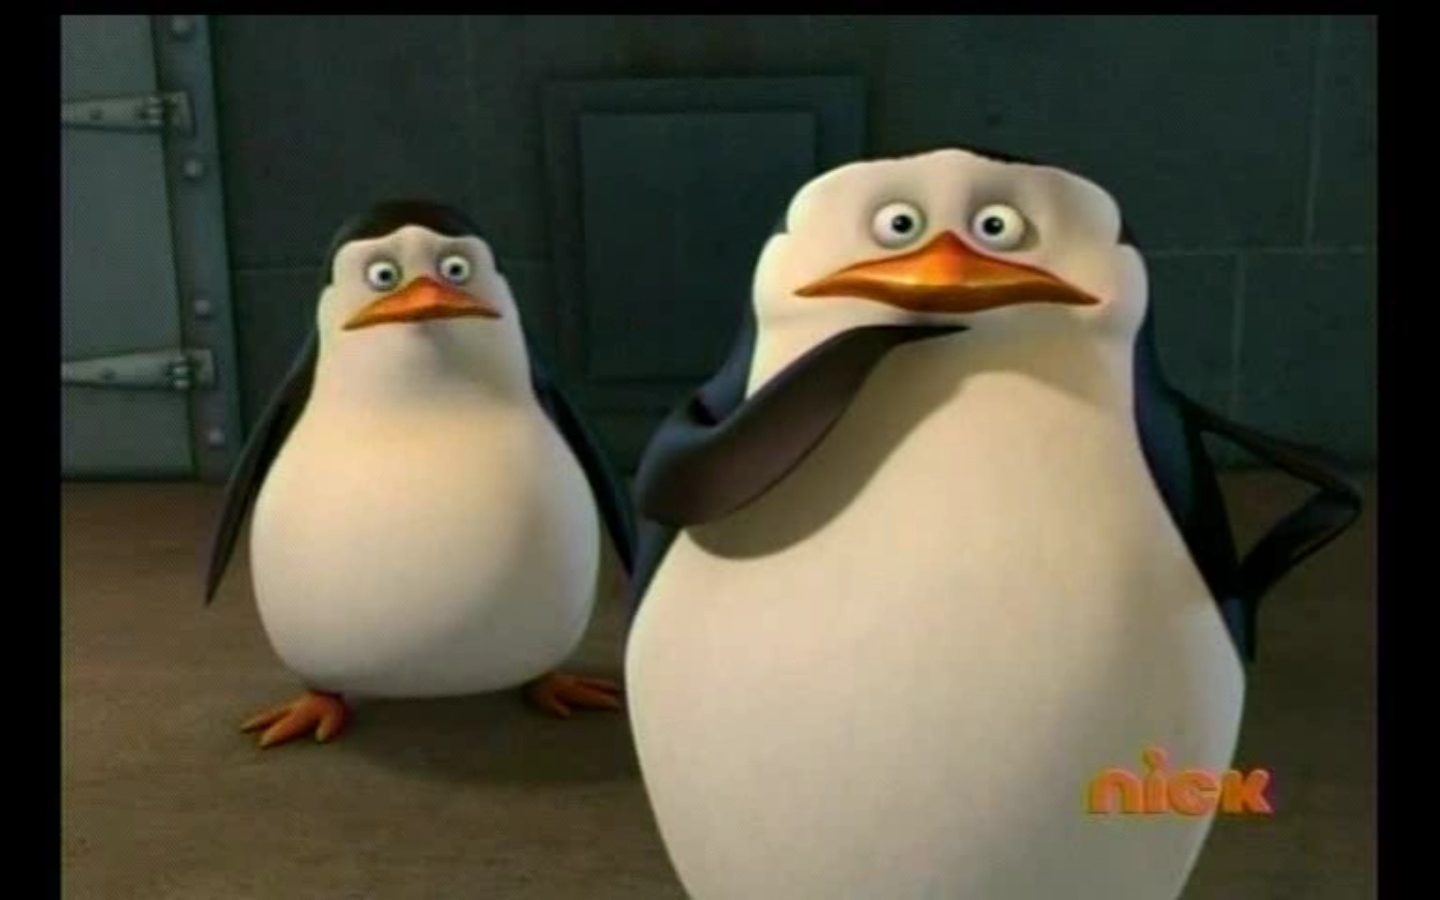 Uh-oh-what-just-happened-penguins-of-madagascar-18652283-1440-900.jpg